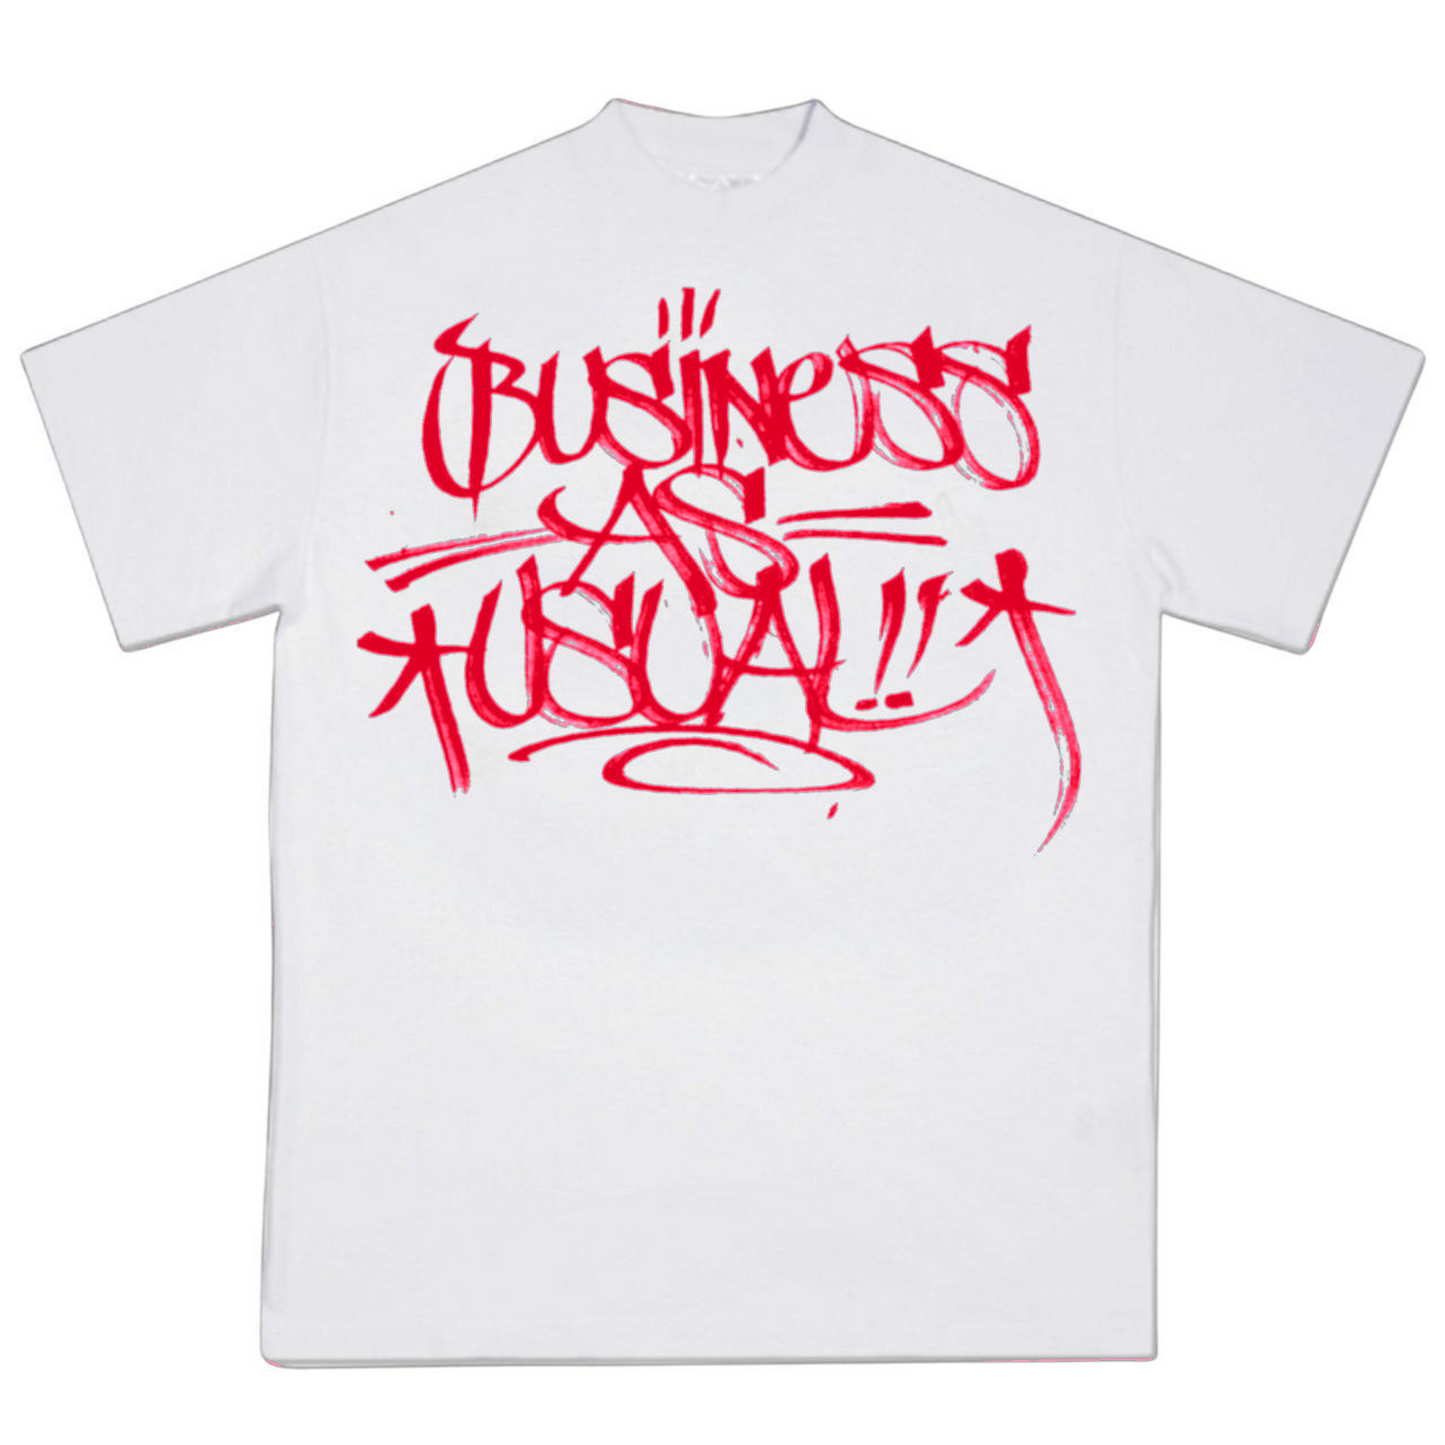 BUSINESS AS USUAL TEE